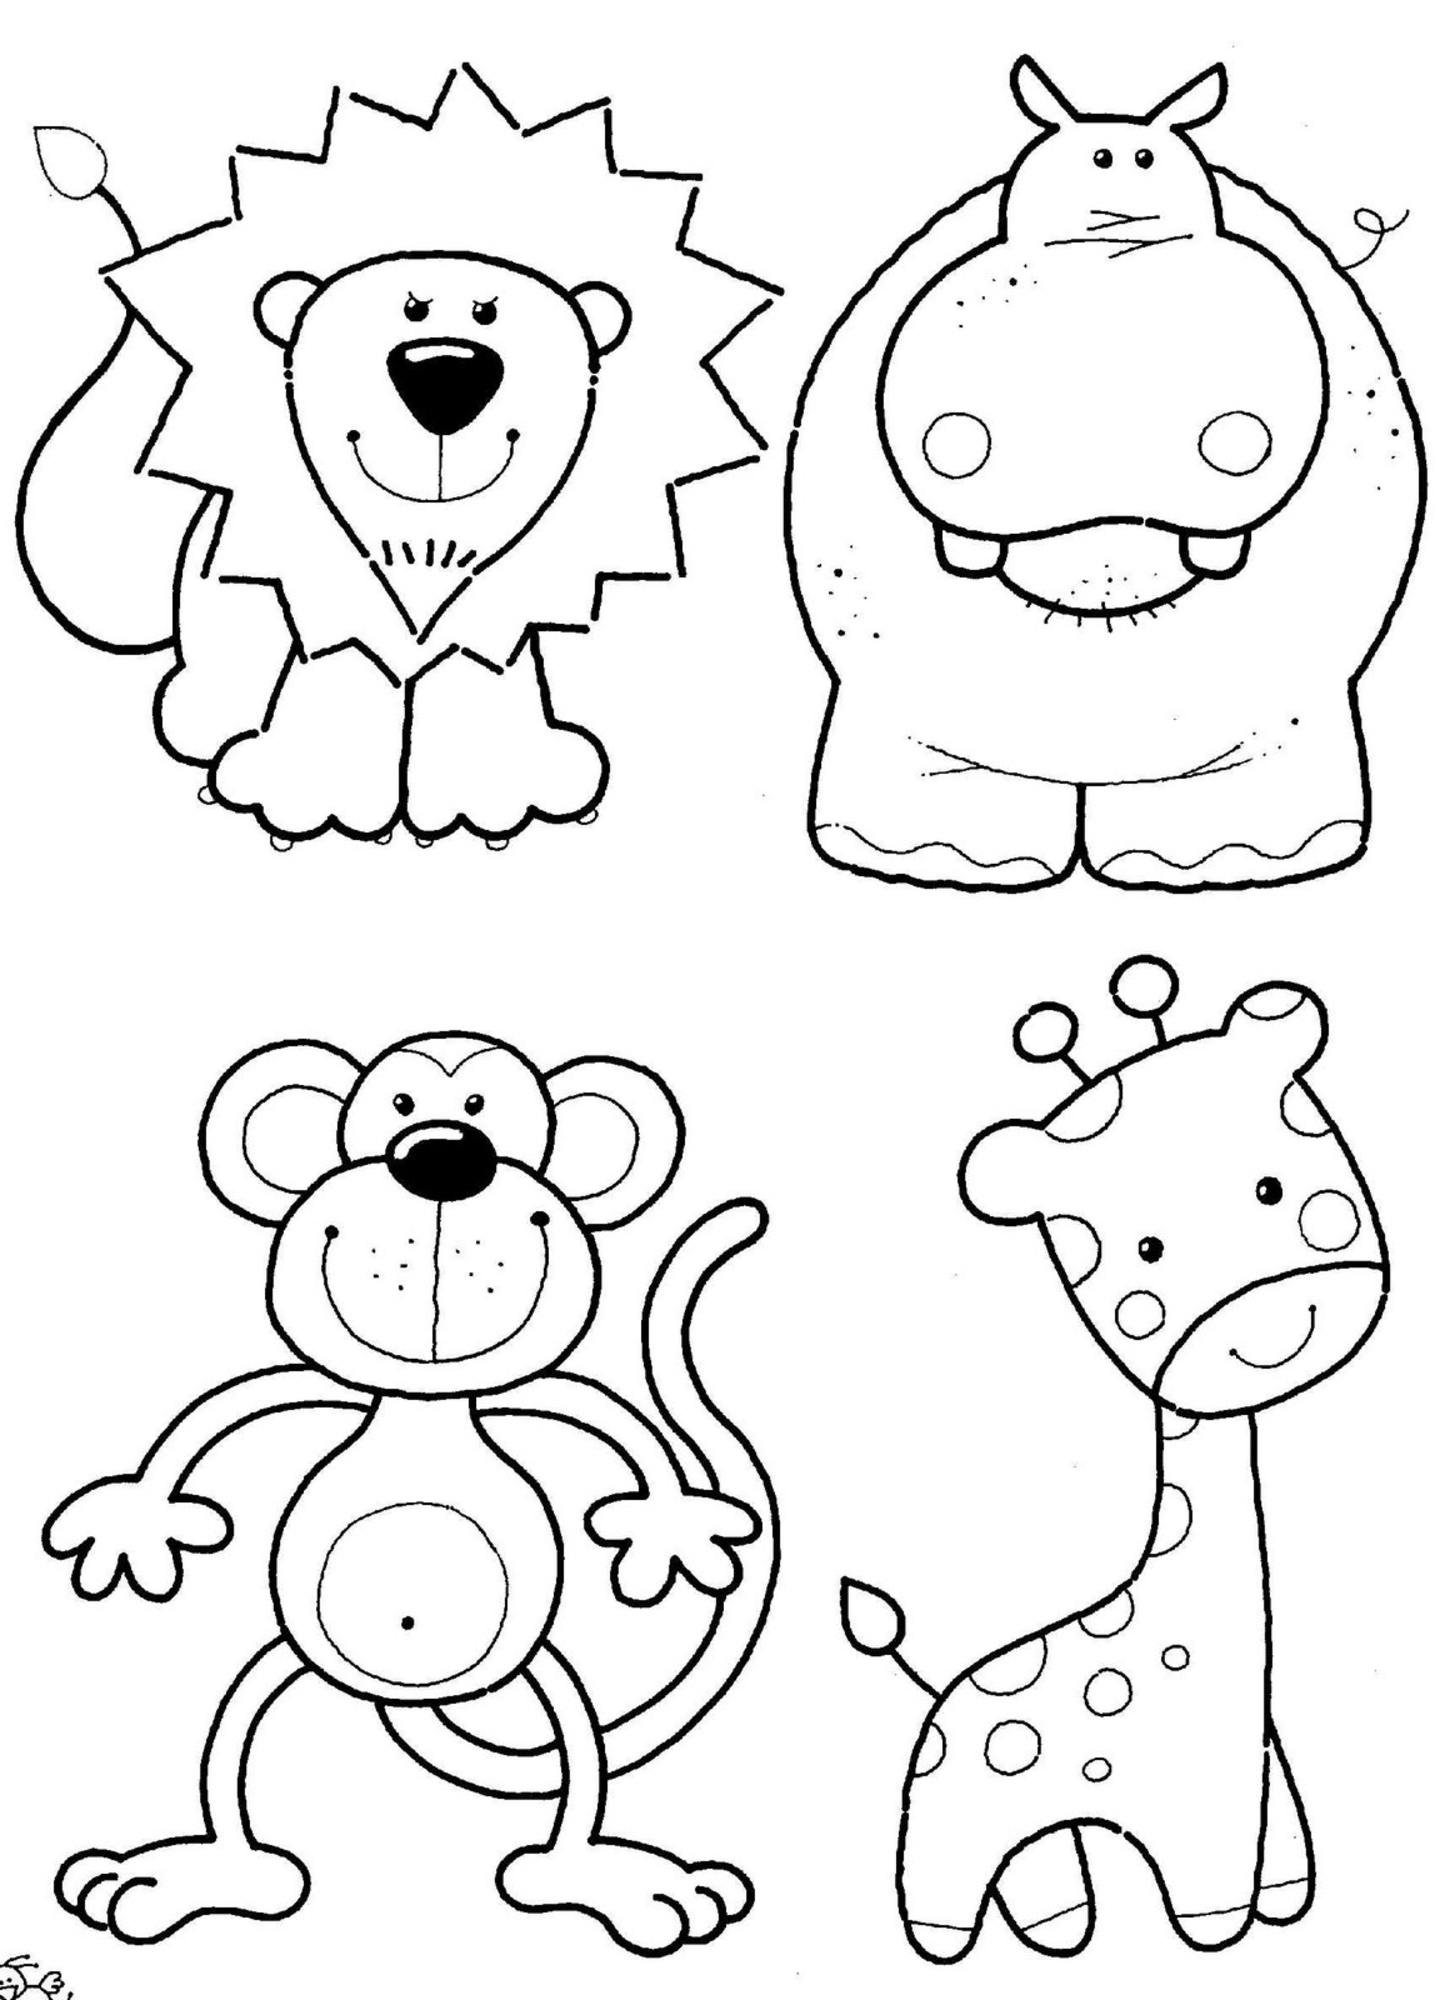 Animal Coloring Pages Image